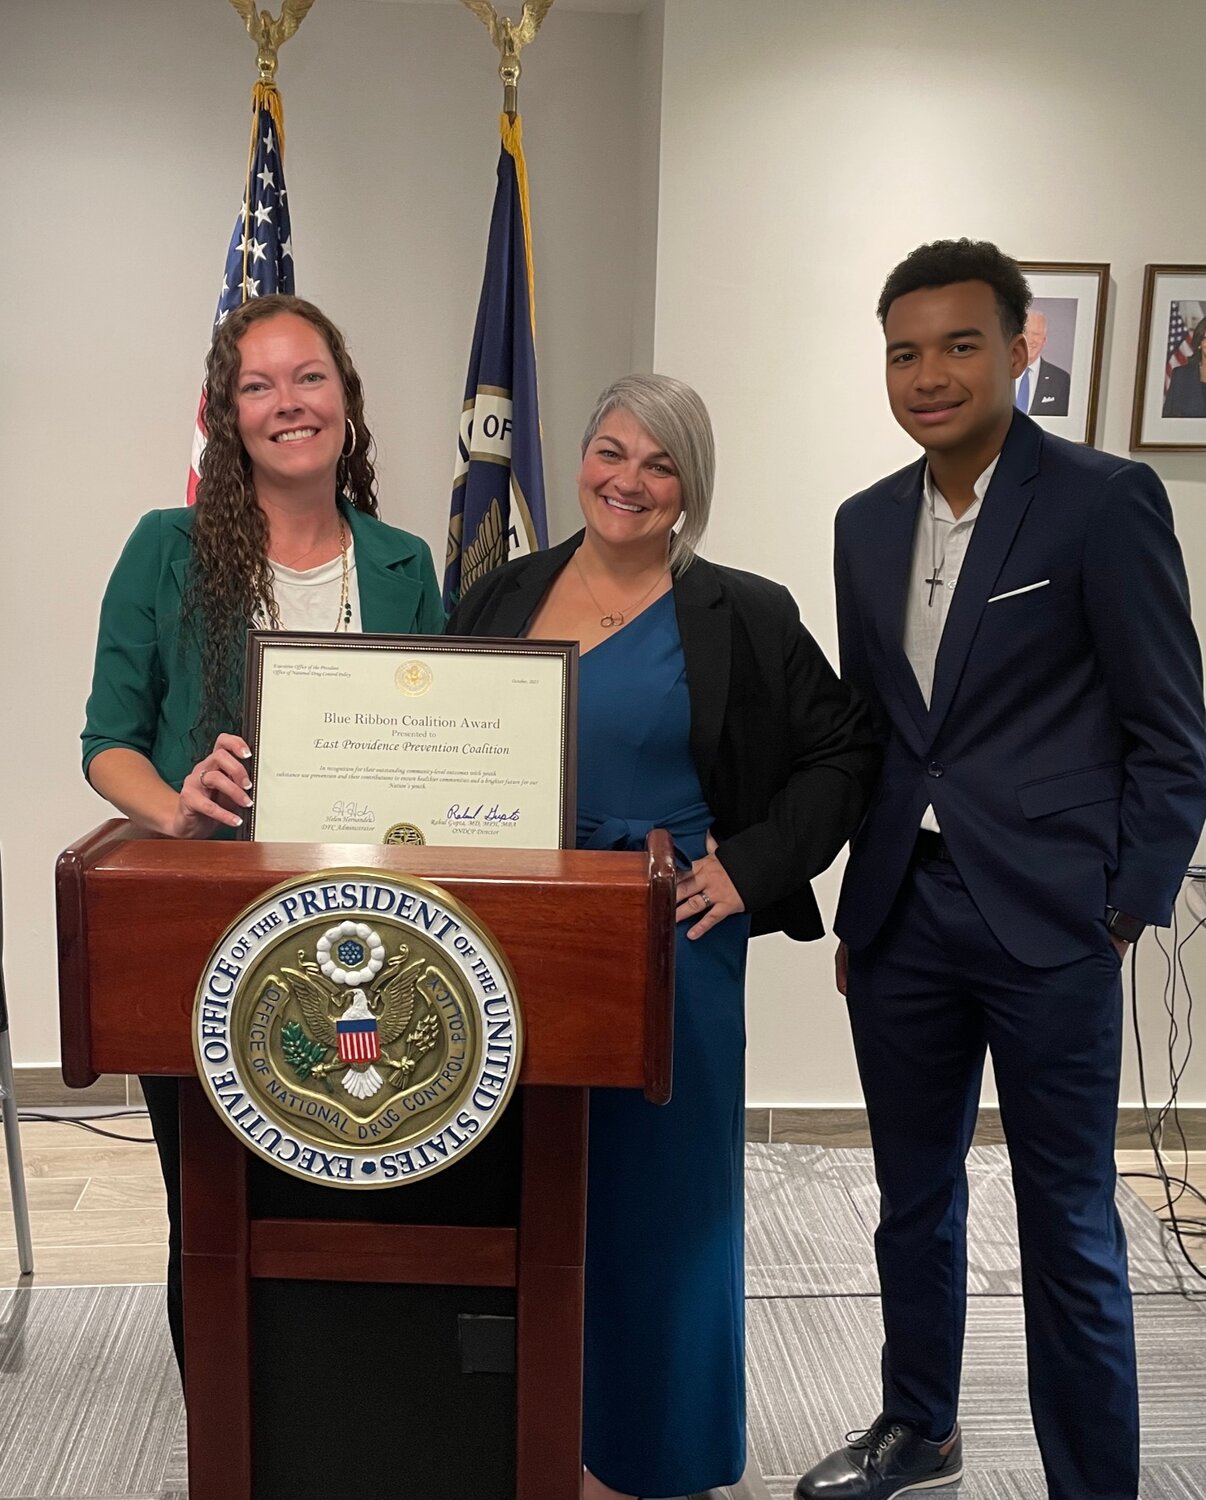 •EPPC Director Madeline Marlow, EPPC Youth & Media Relations Coordinator Bethanie Rado and East Providence Youth Council (EPYC) representative Tristen Nunes holding the Blue Ribbon Coalition award presented by the EOP and ONDCP.